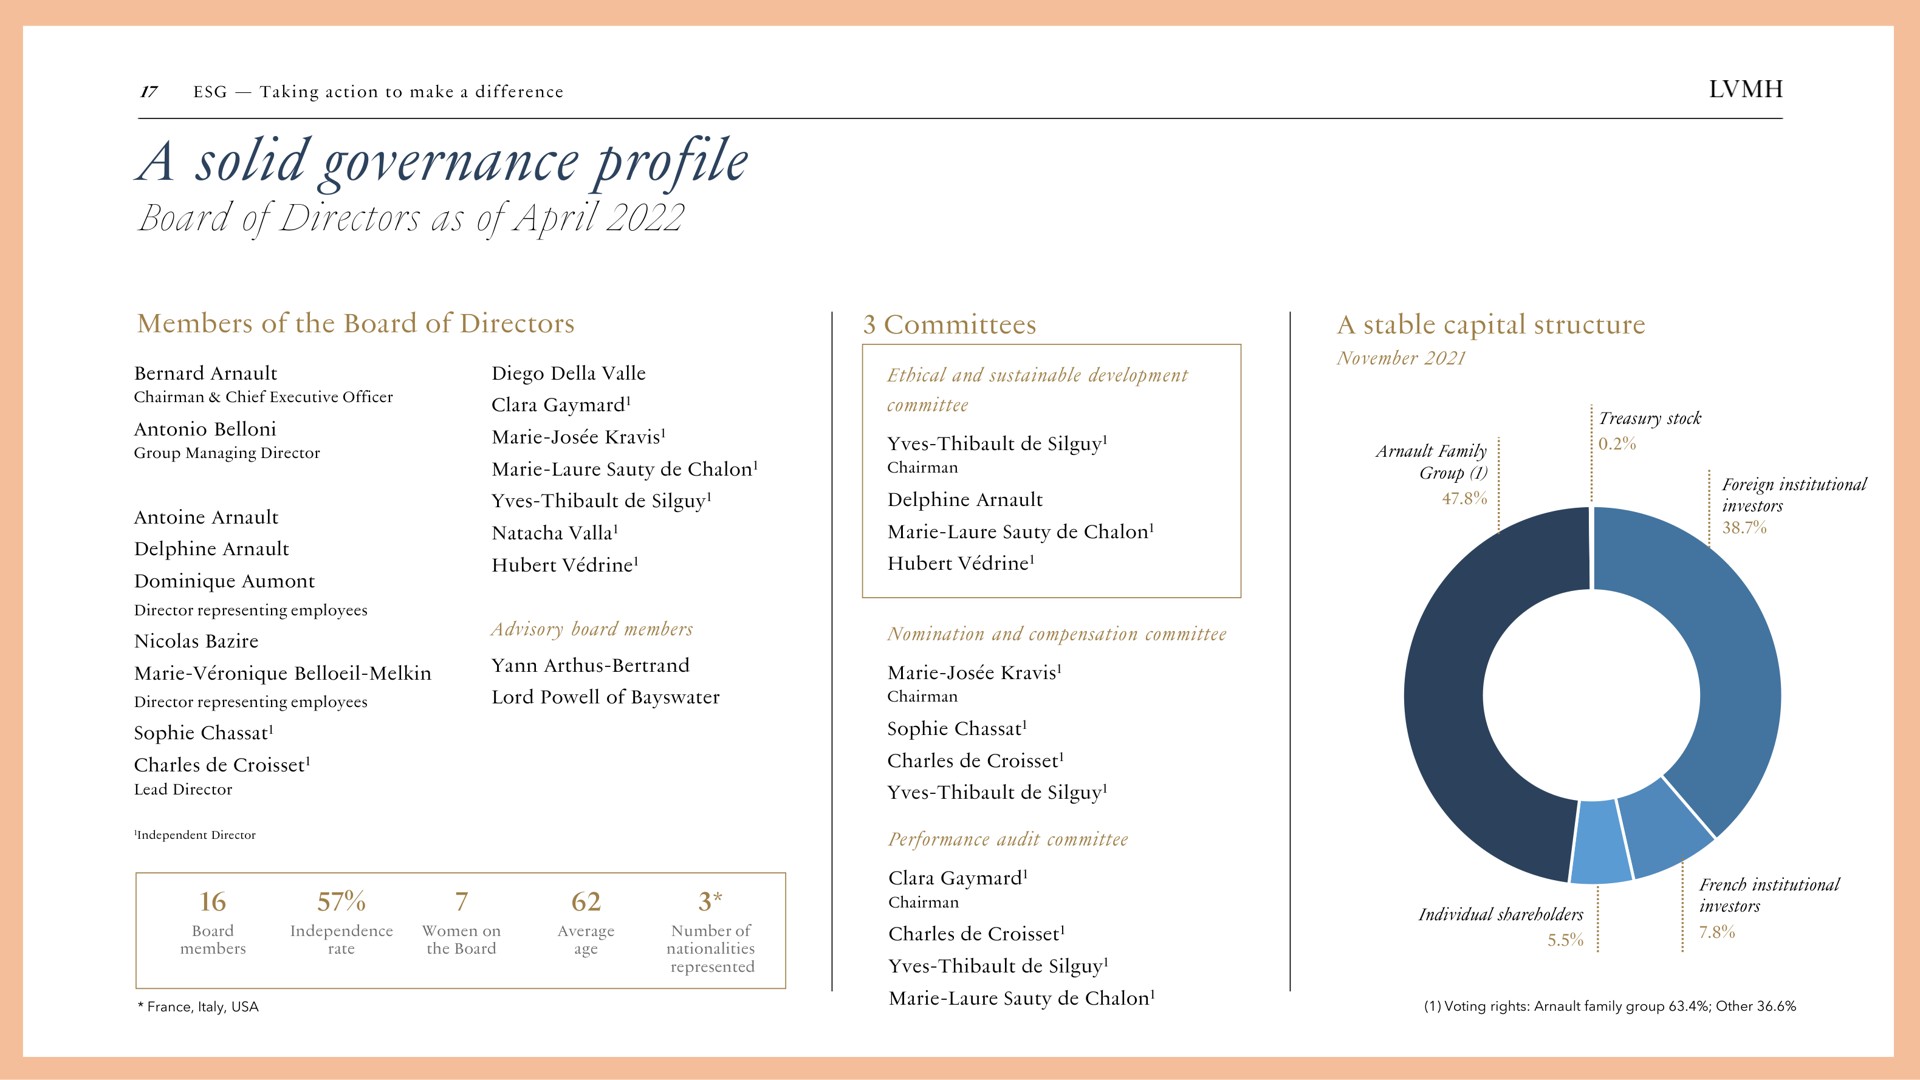 a solid governance profile board of directors as of | LVMH